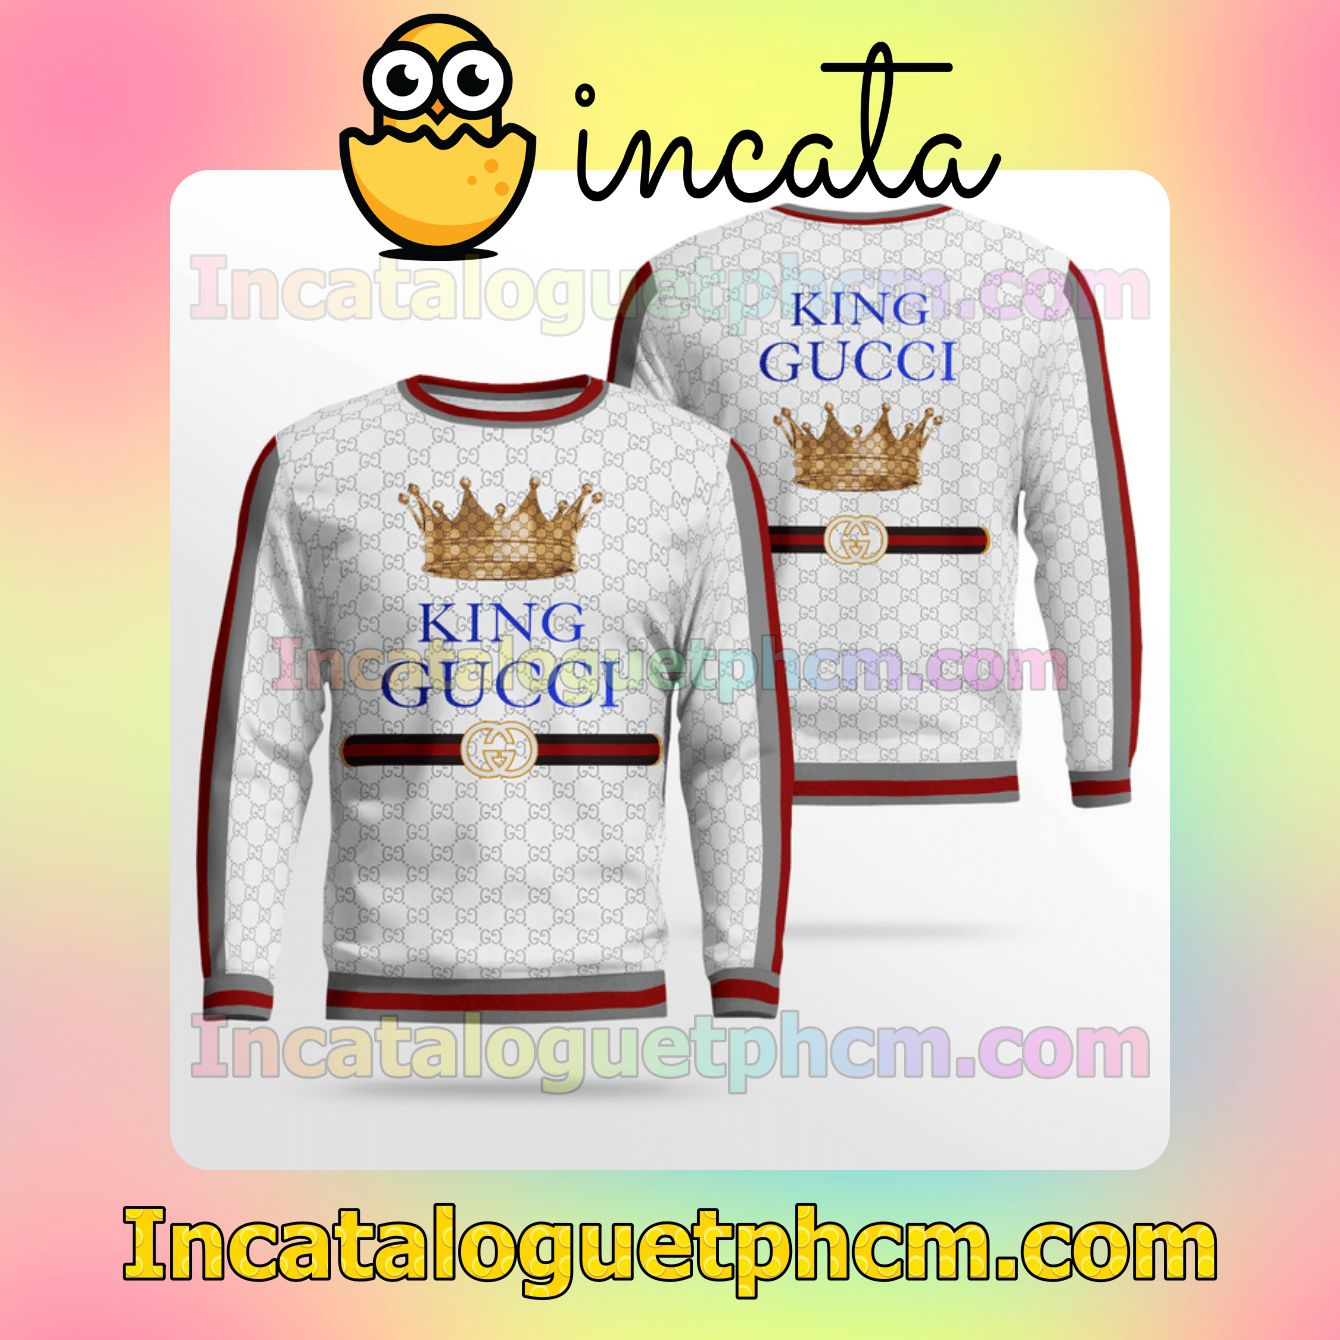 King Gucci Crown White Monogram With Black And Red Stripes Logo Wool Sweater Sweatshirt Gift For Mom